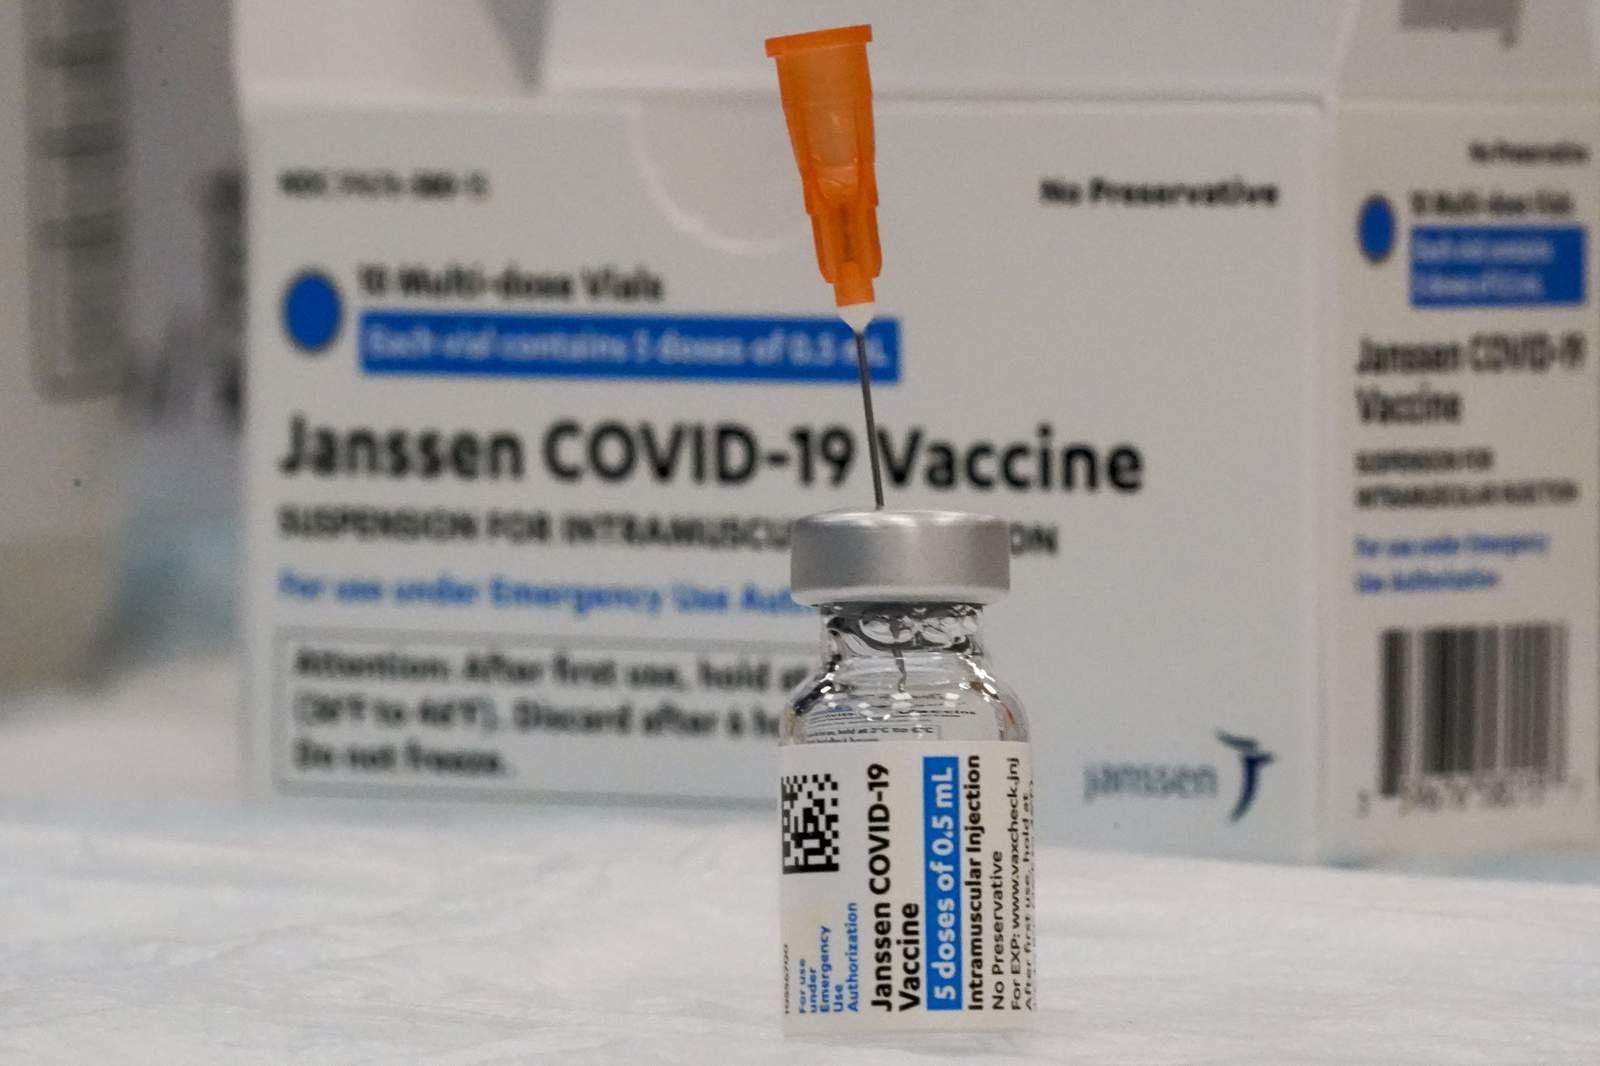 FDA recommends pause for Johnson & Johnson COVID vaccine after extremely rare blood clotting cases